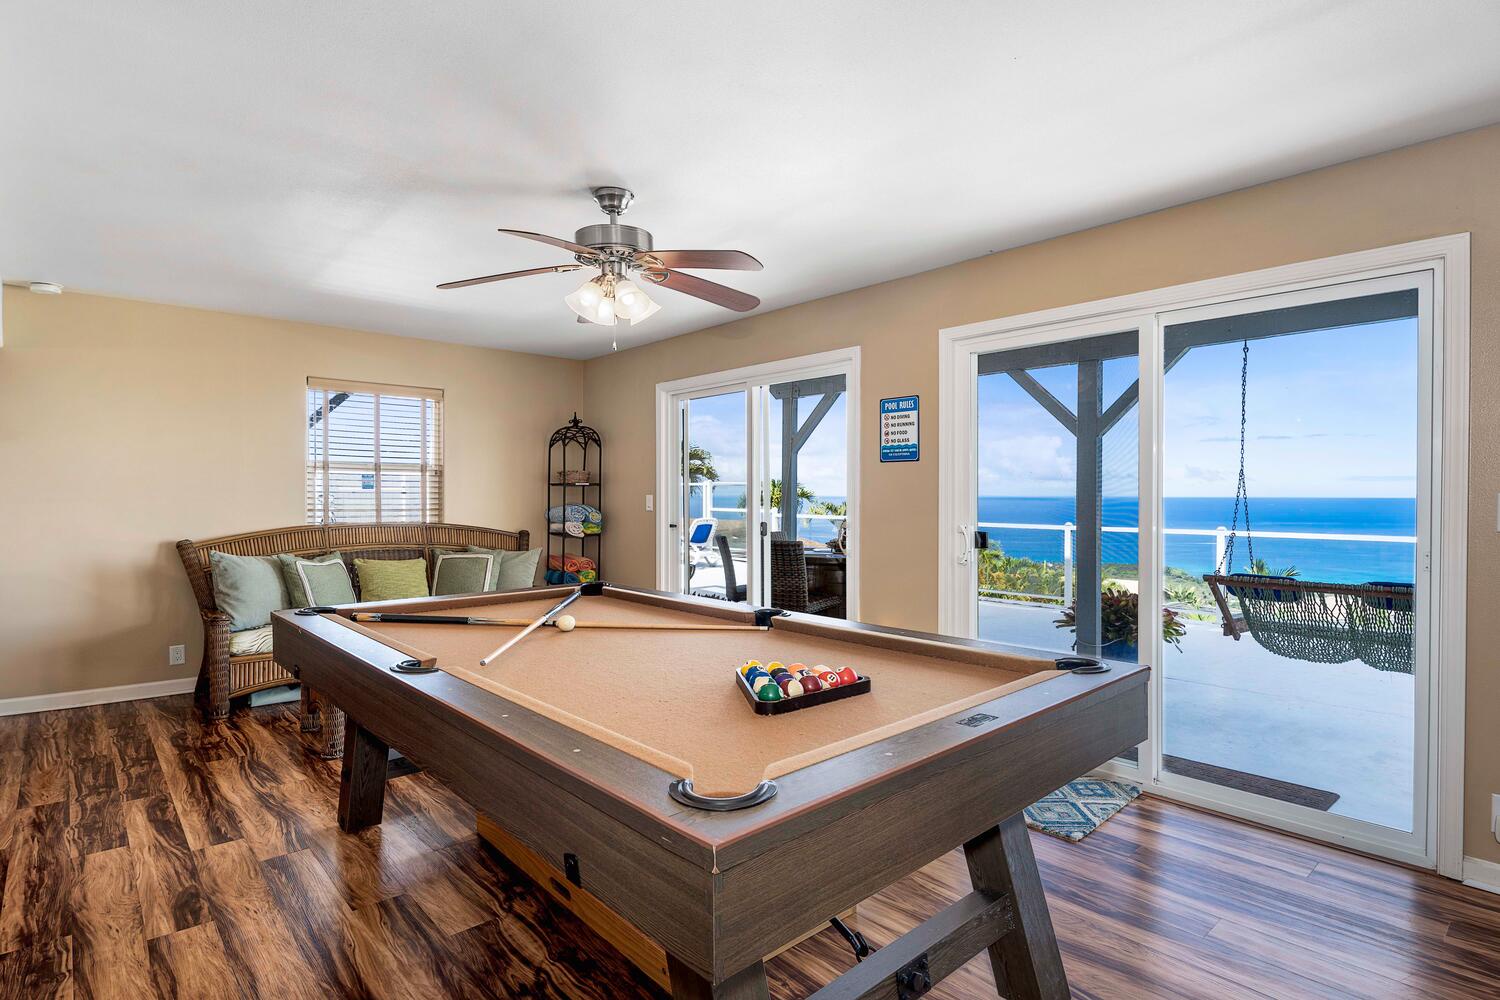 Kailua Kona Vacation Rentals, Honu O Kai (Turtle of the Sea) - Have fun in the Family Room with lots of room to entertain.